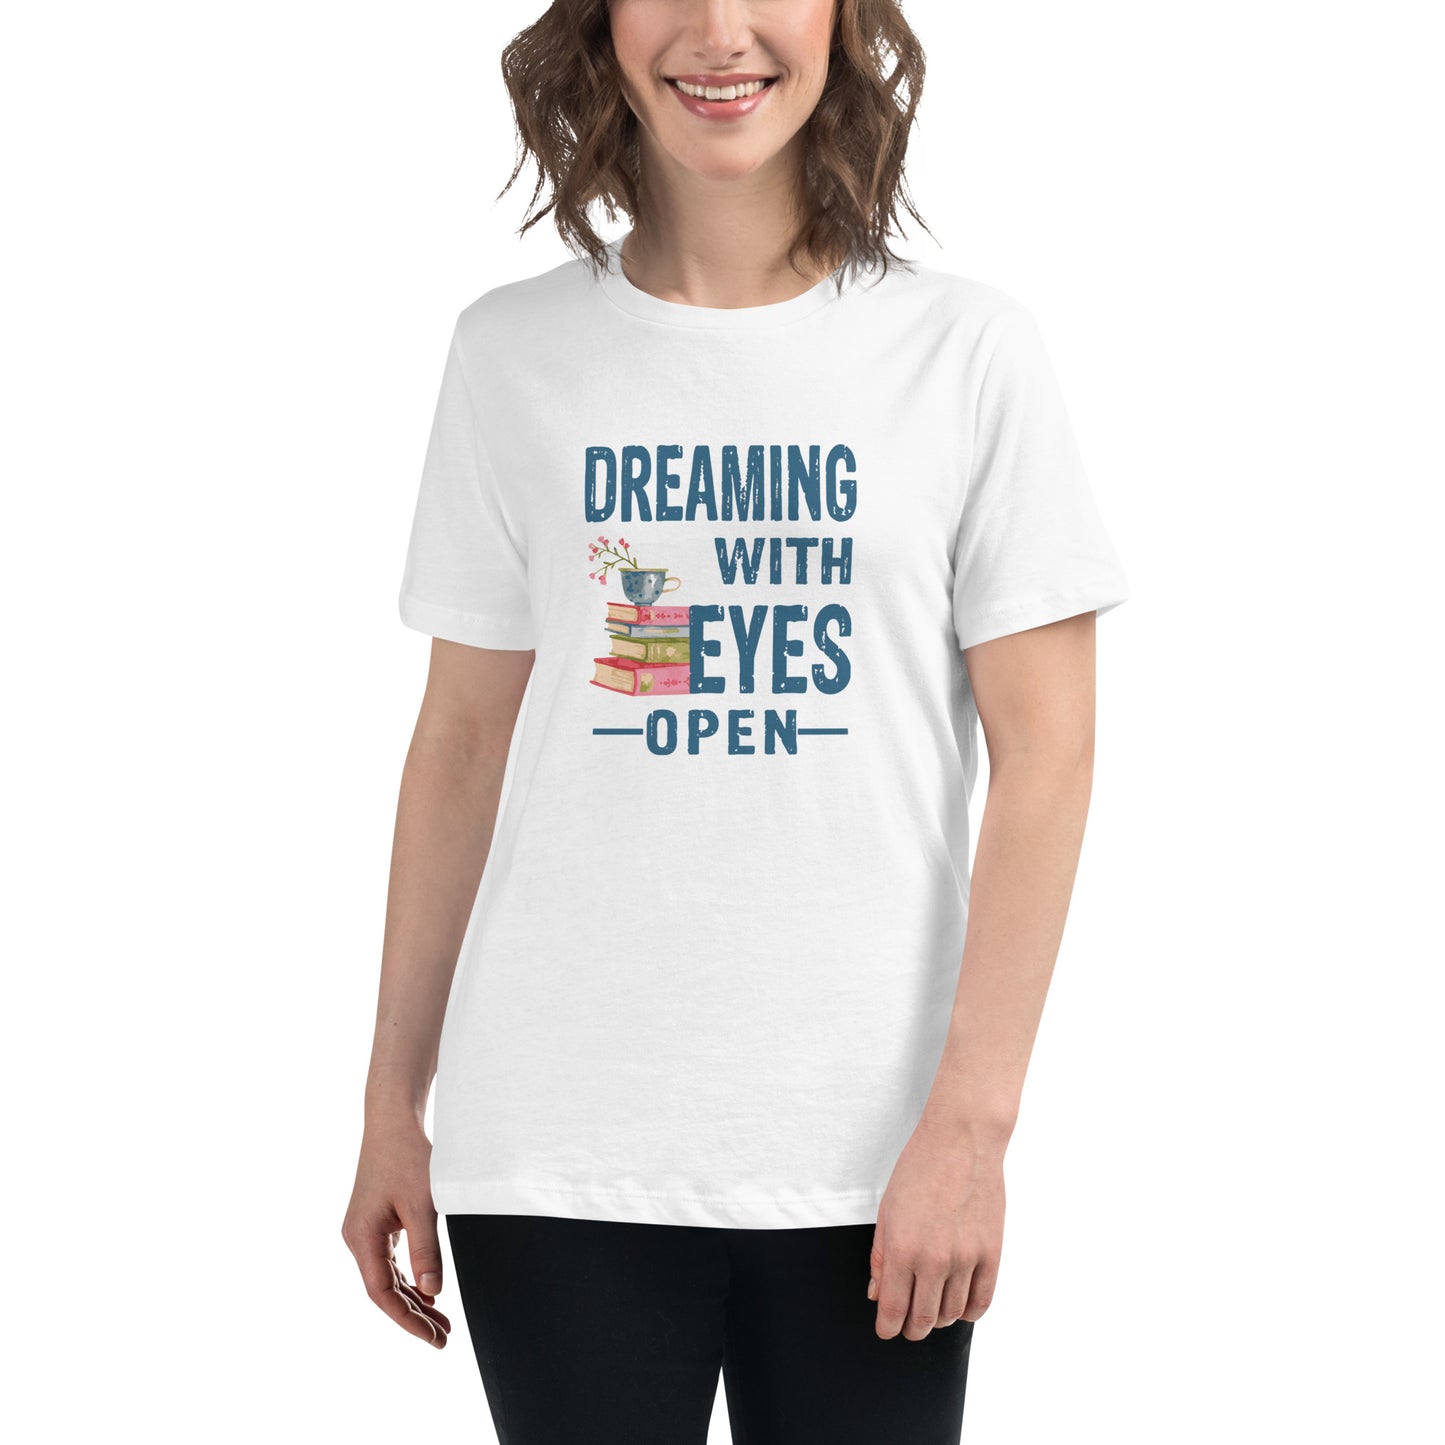 Dreaming with eyes open